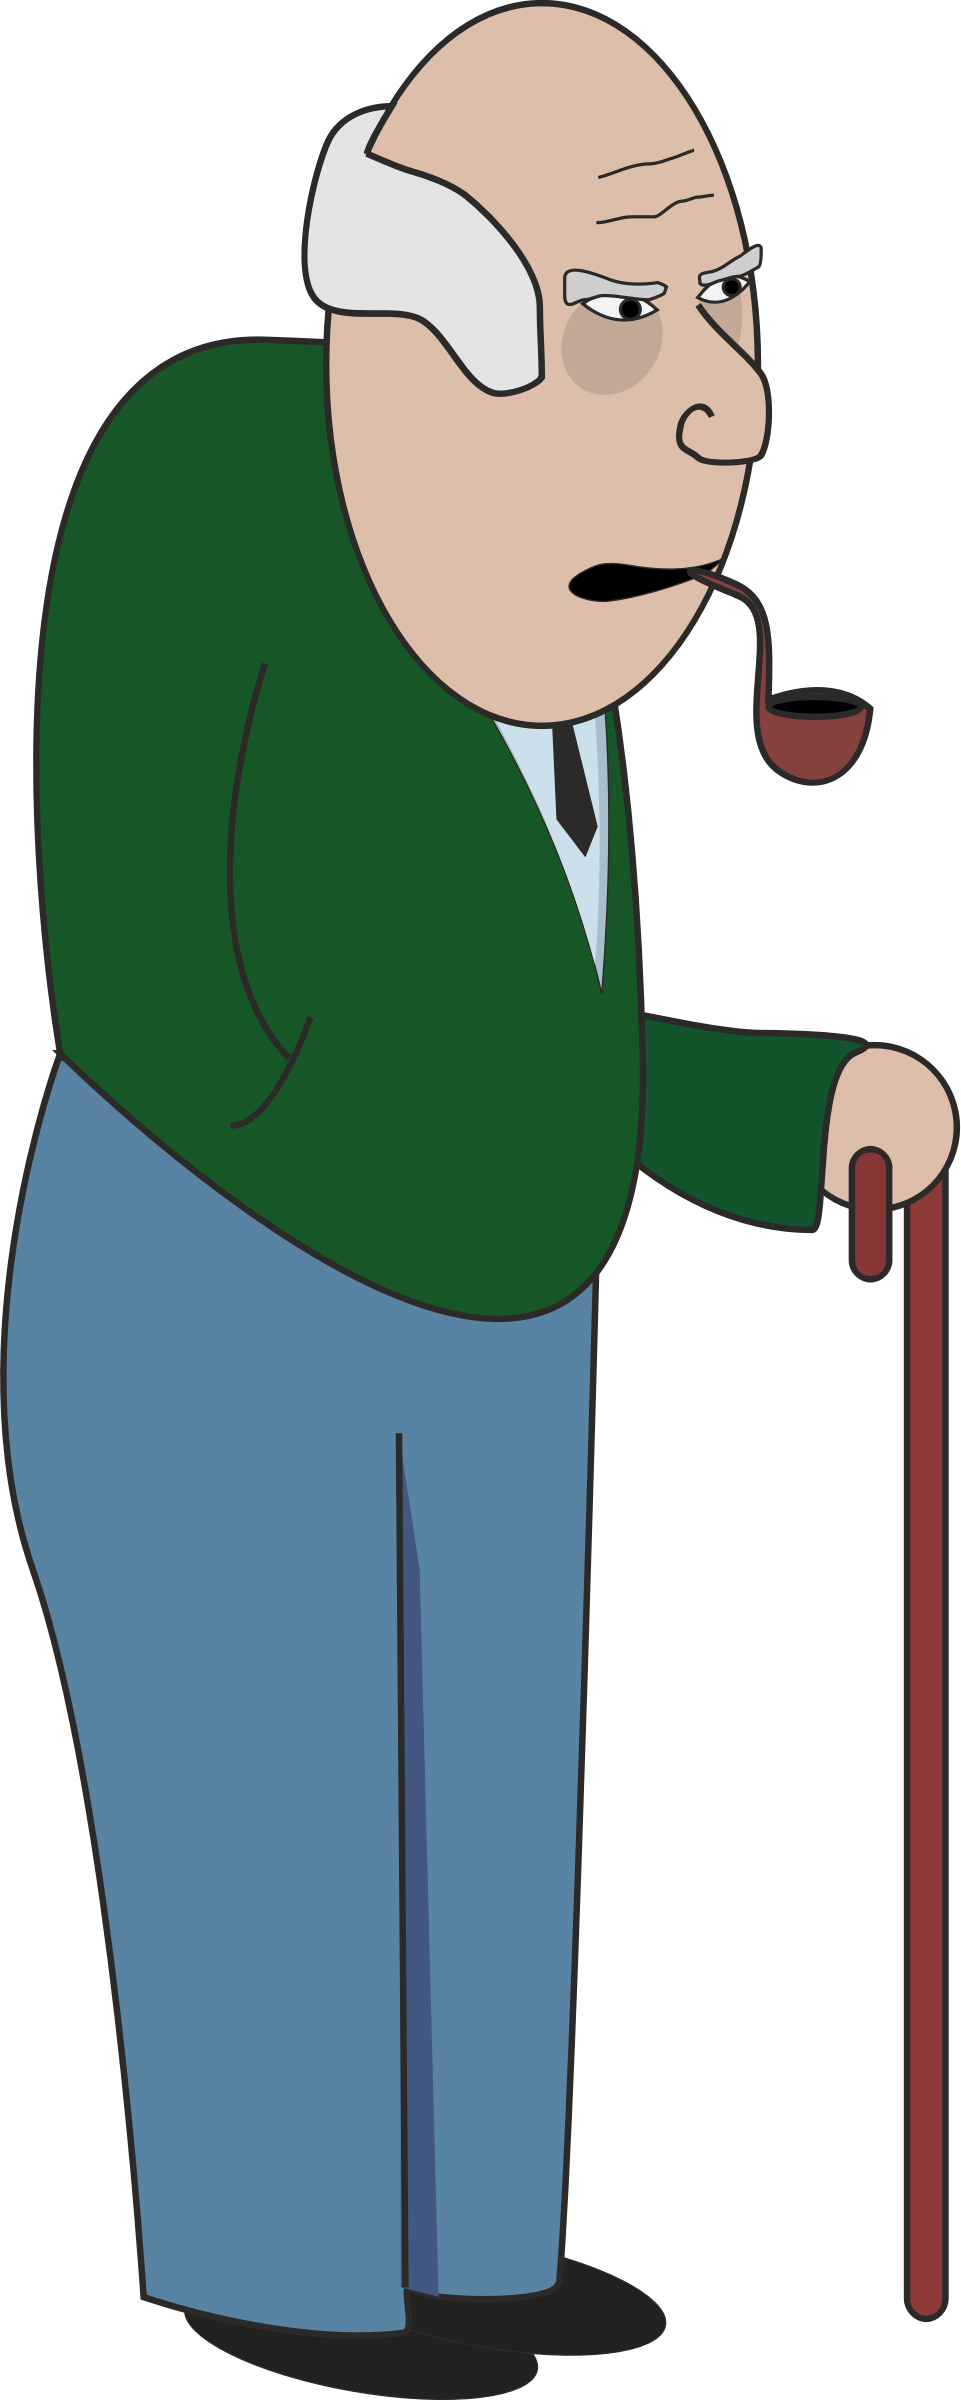 Clipart walking healthy old man. Senior health and fitness